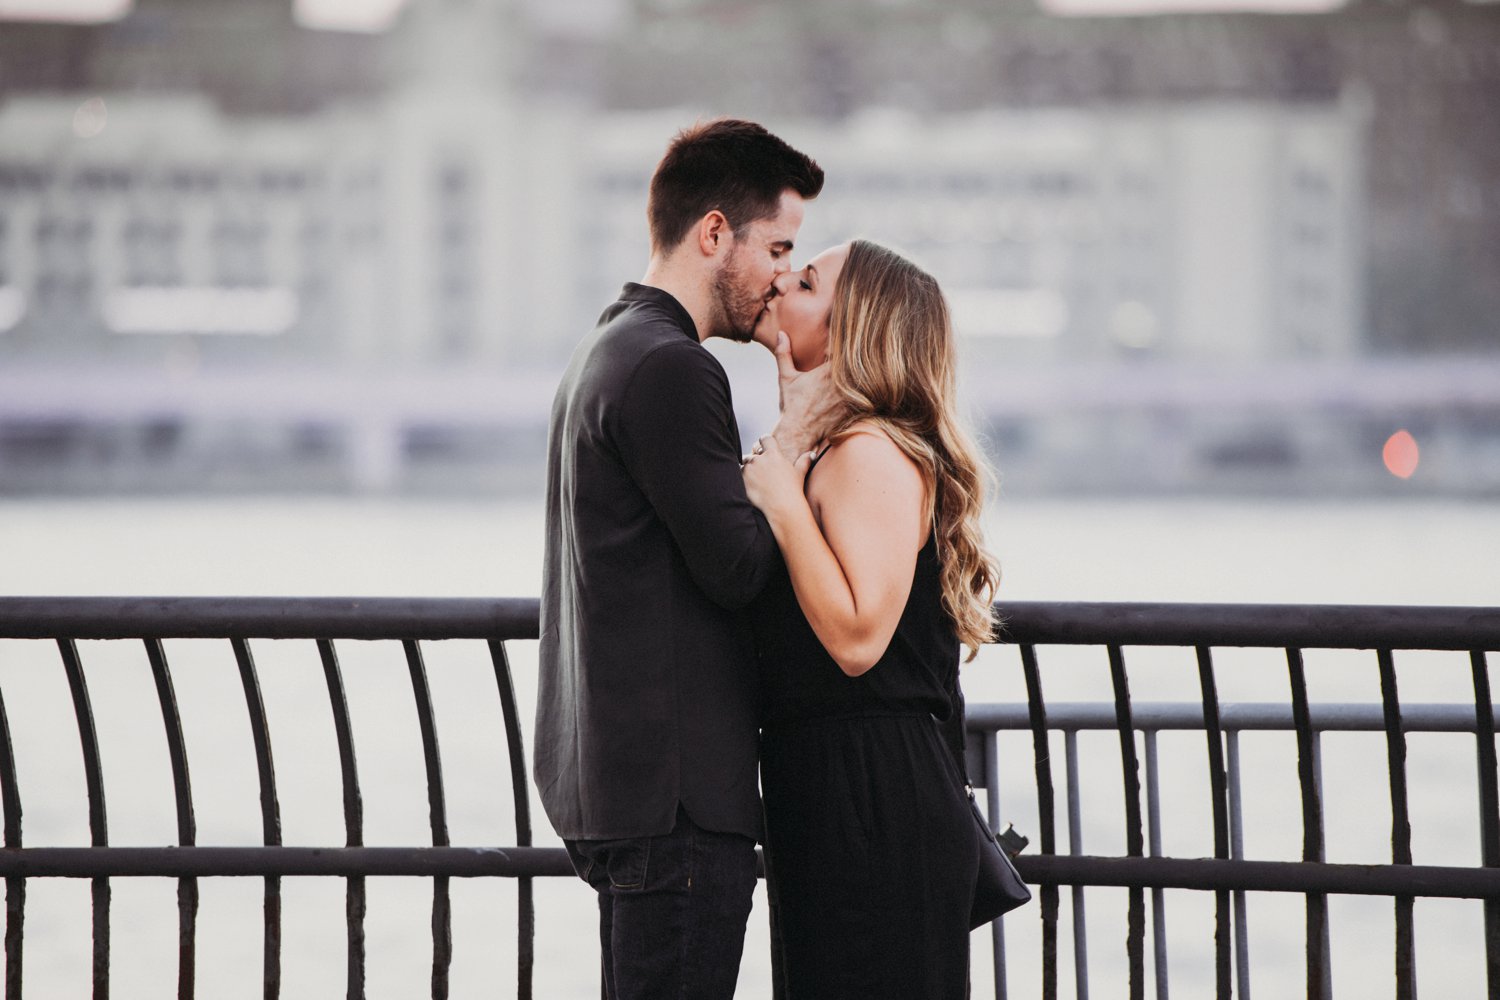  images by feliciathephotographer.com | destination wedding photographer | new york city | brooklyn bridge | proposal | engagement | whimsical | romantic | kiss | true love | she said yes | casual | 